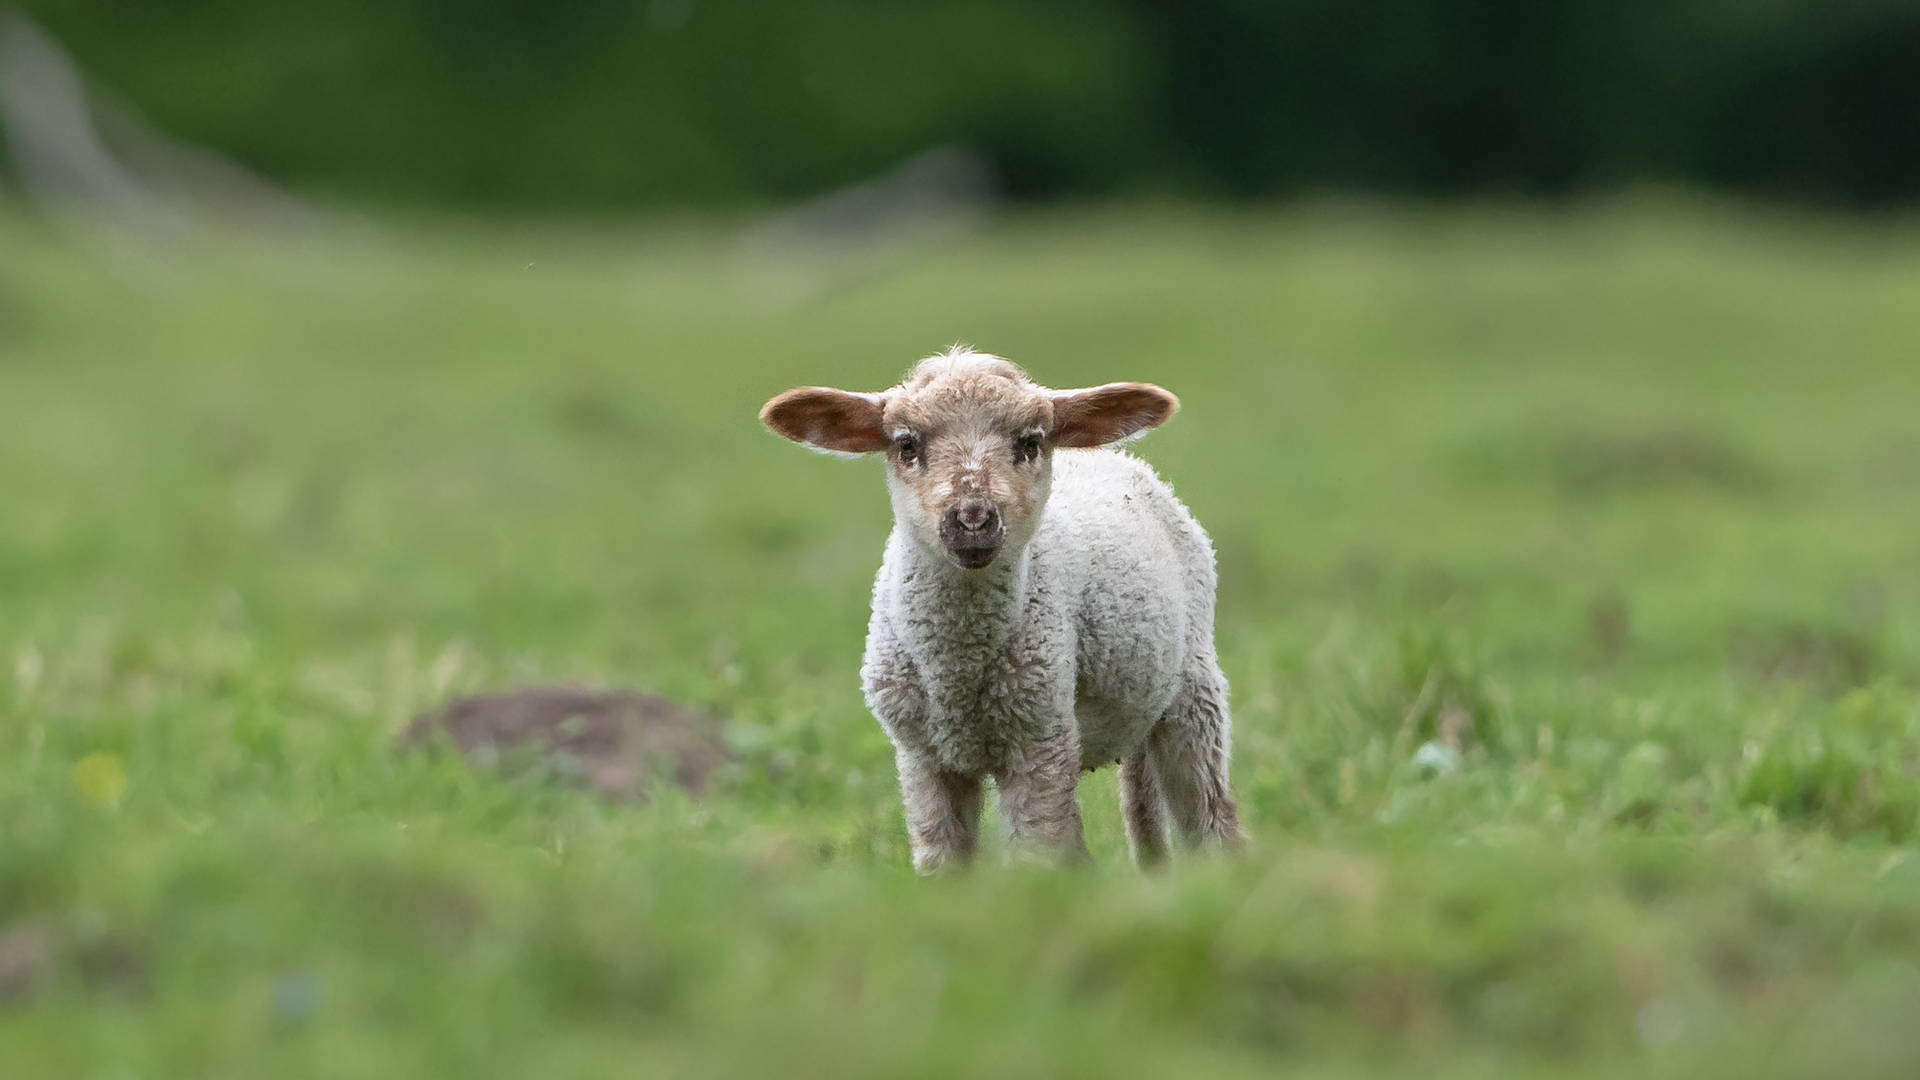 Baby Sheep In Grass Background